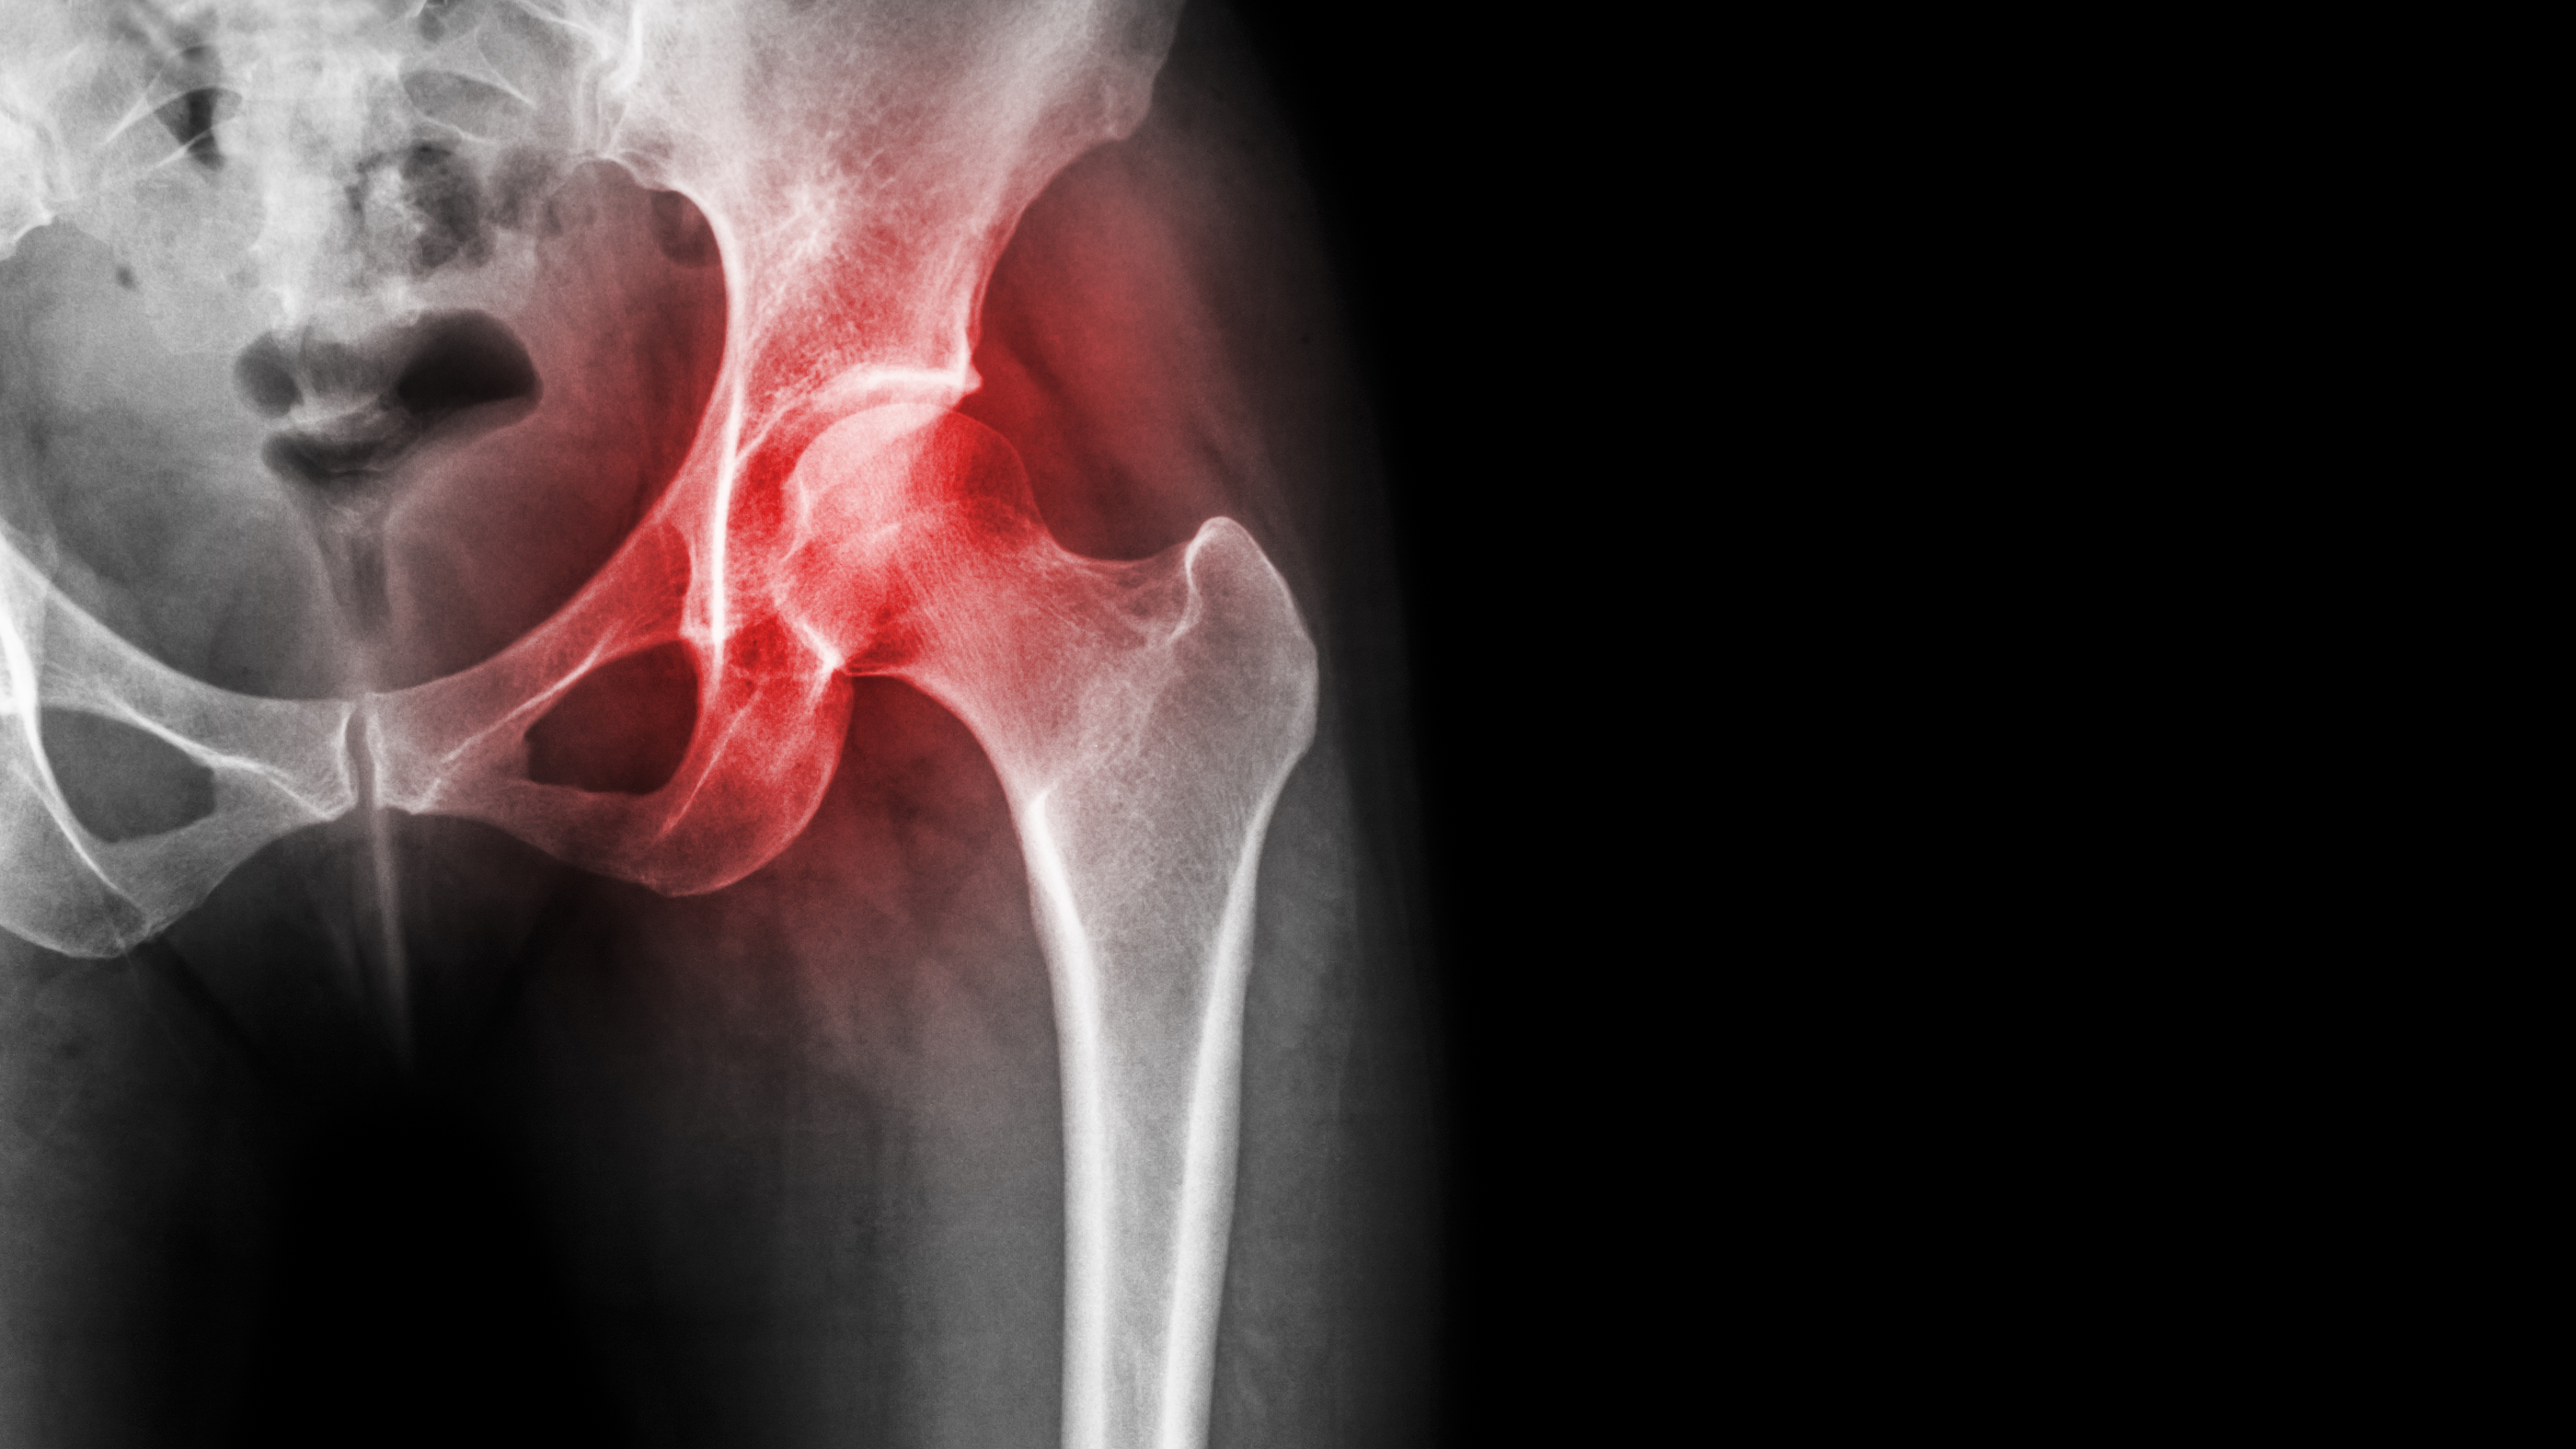 using injections to relieve hip pain after car accident